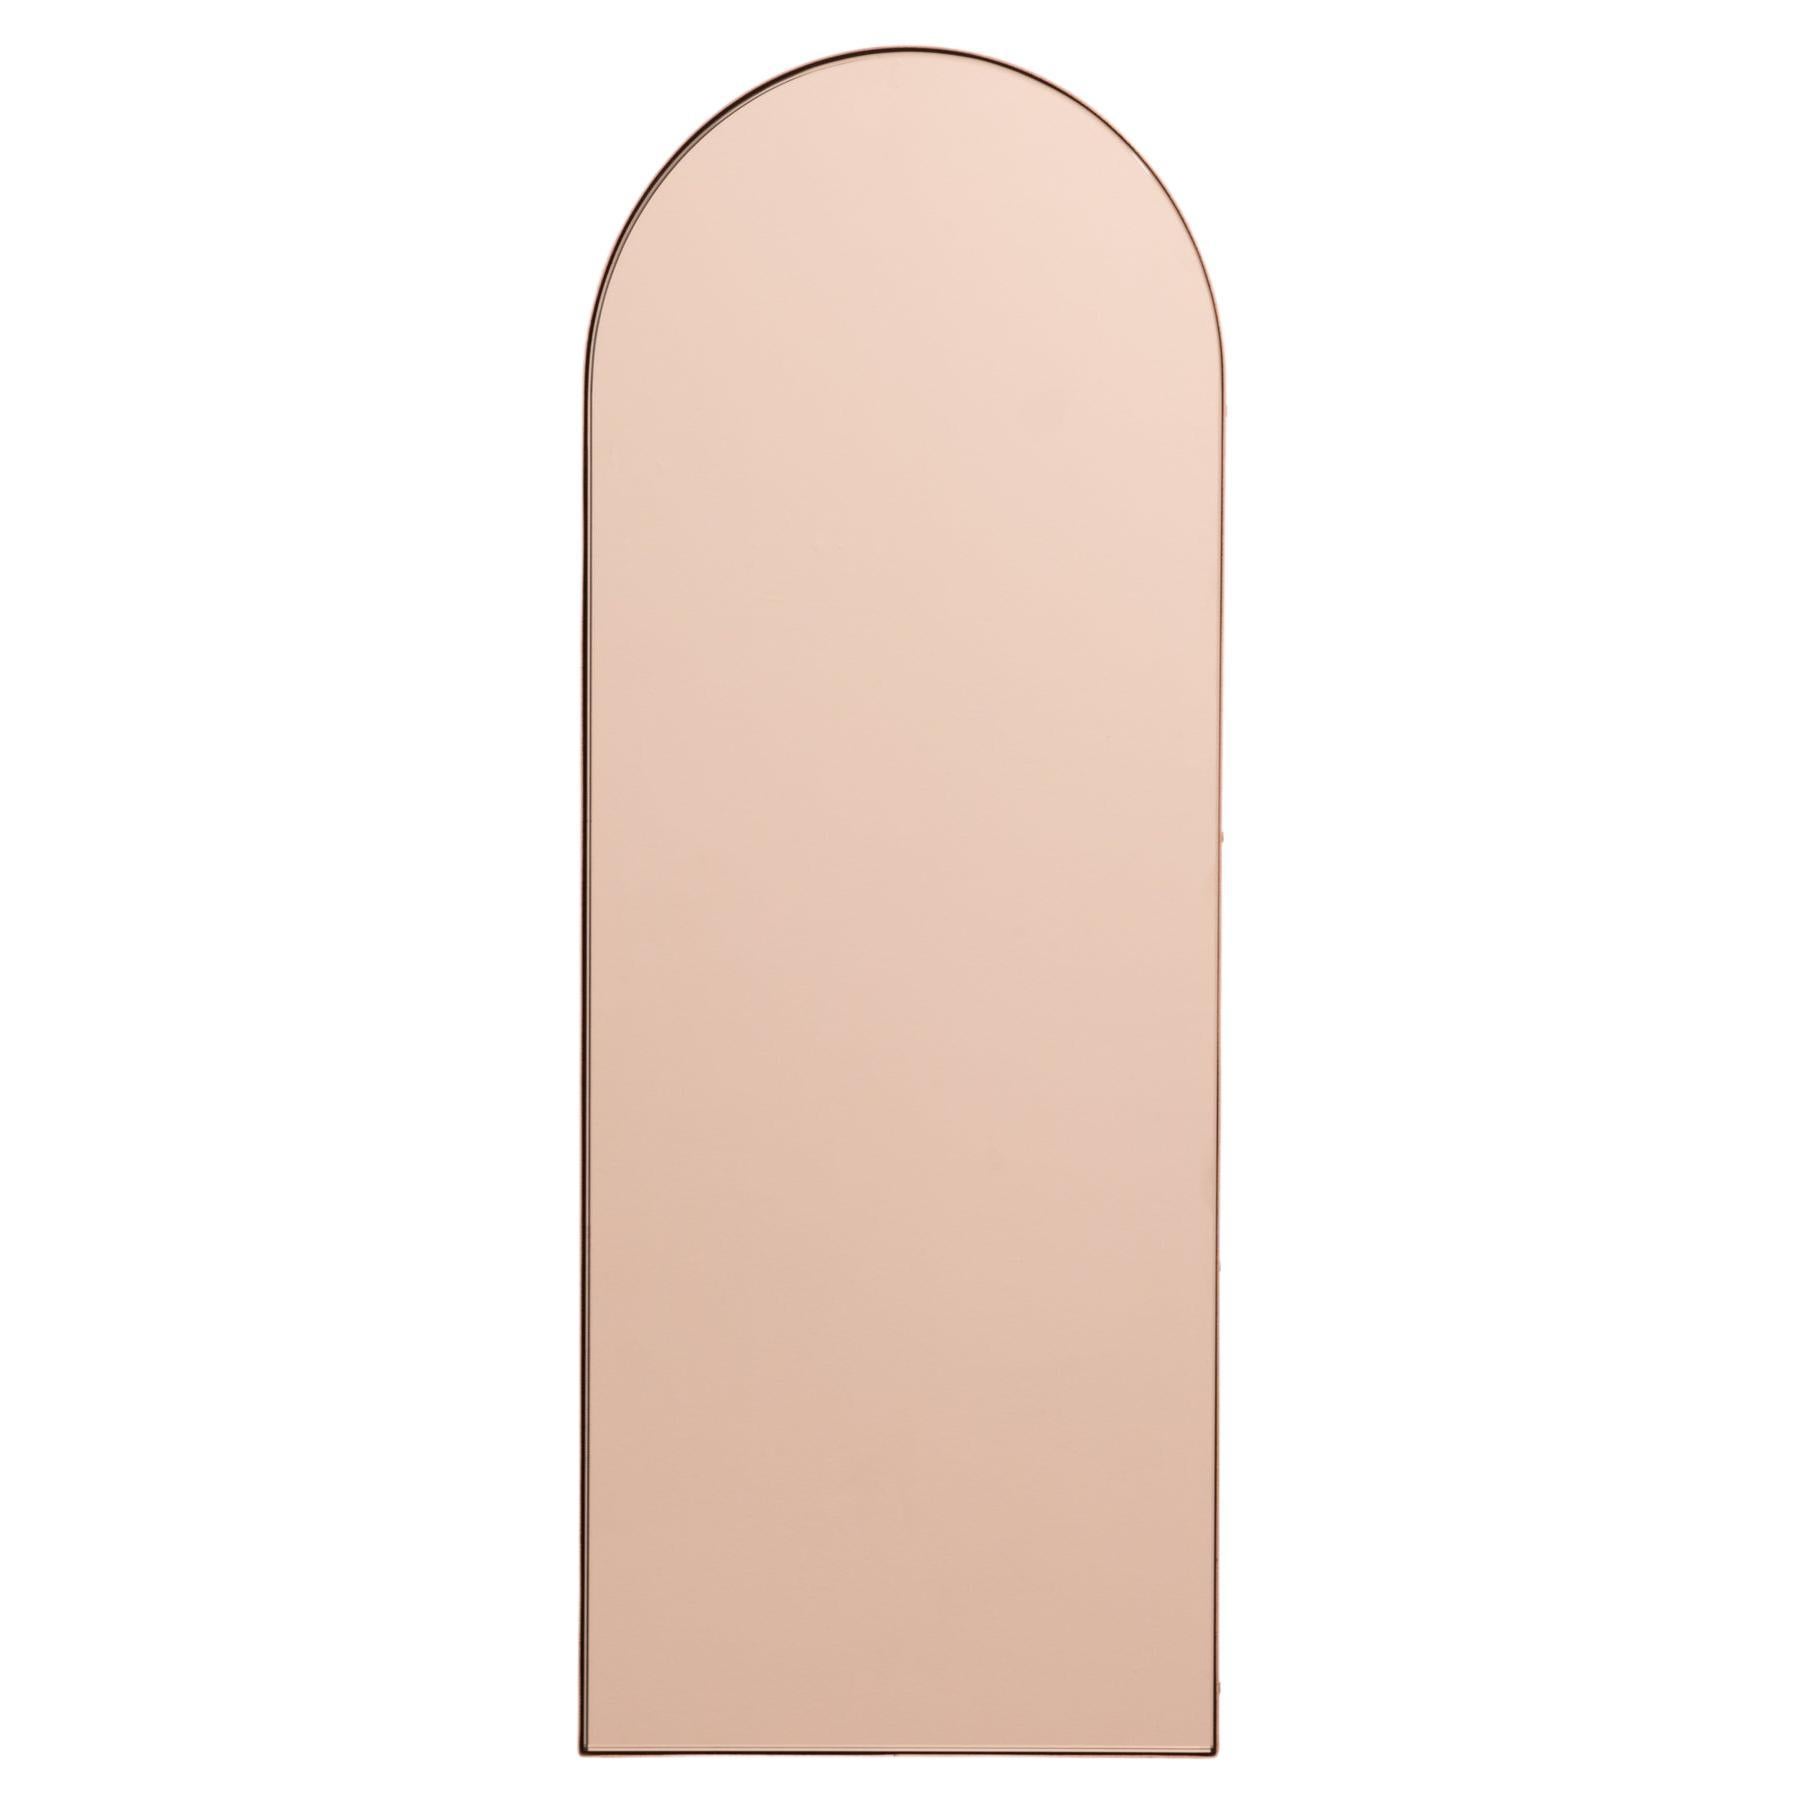 Arcus Arch shaped Rose Gold Contemporary Mirror with a Copper Frame, Medium